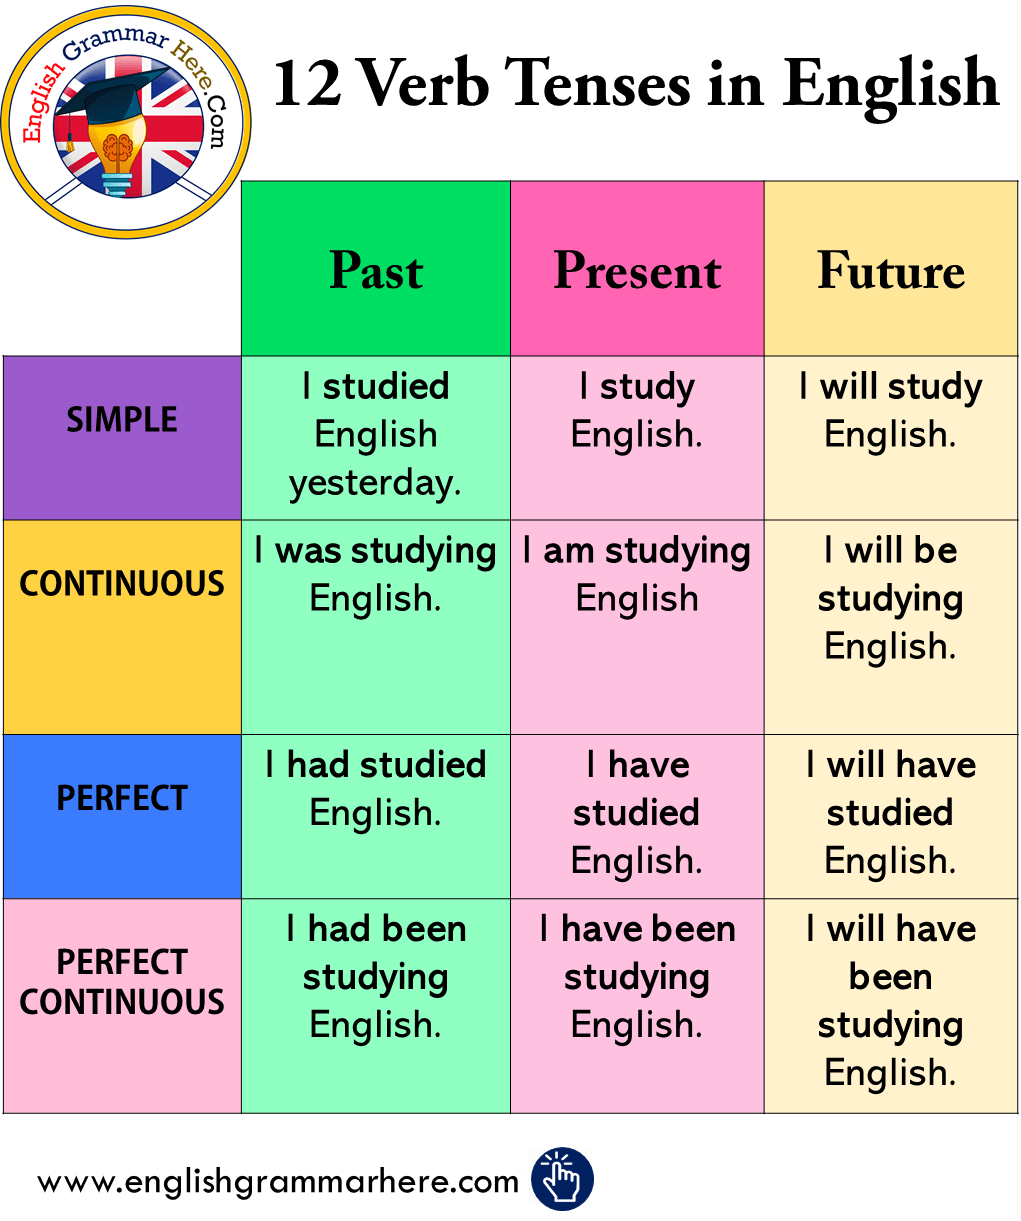 12 Verb Tenses in English